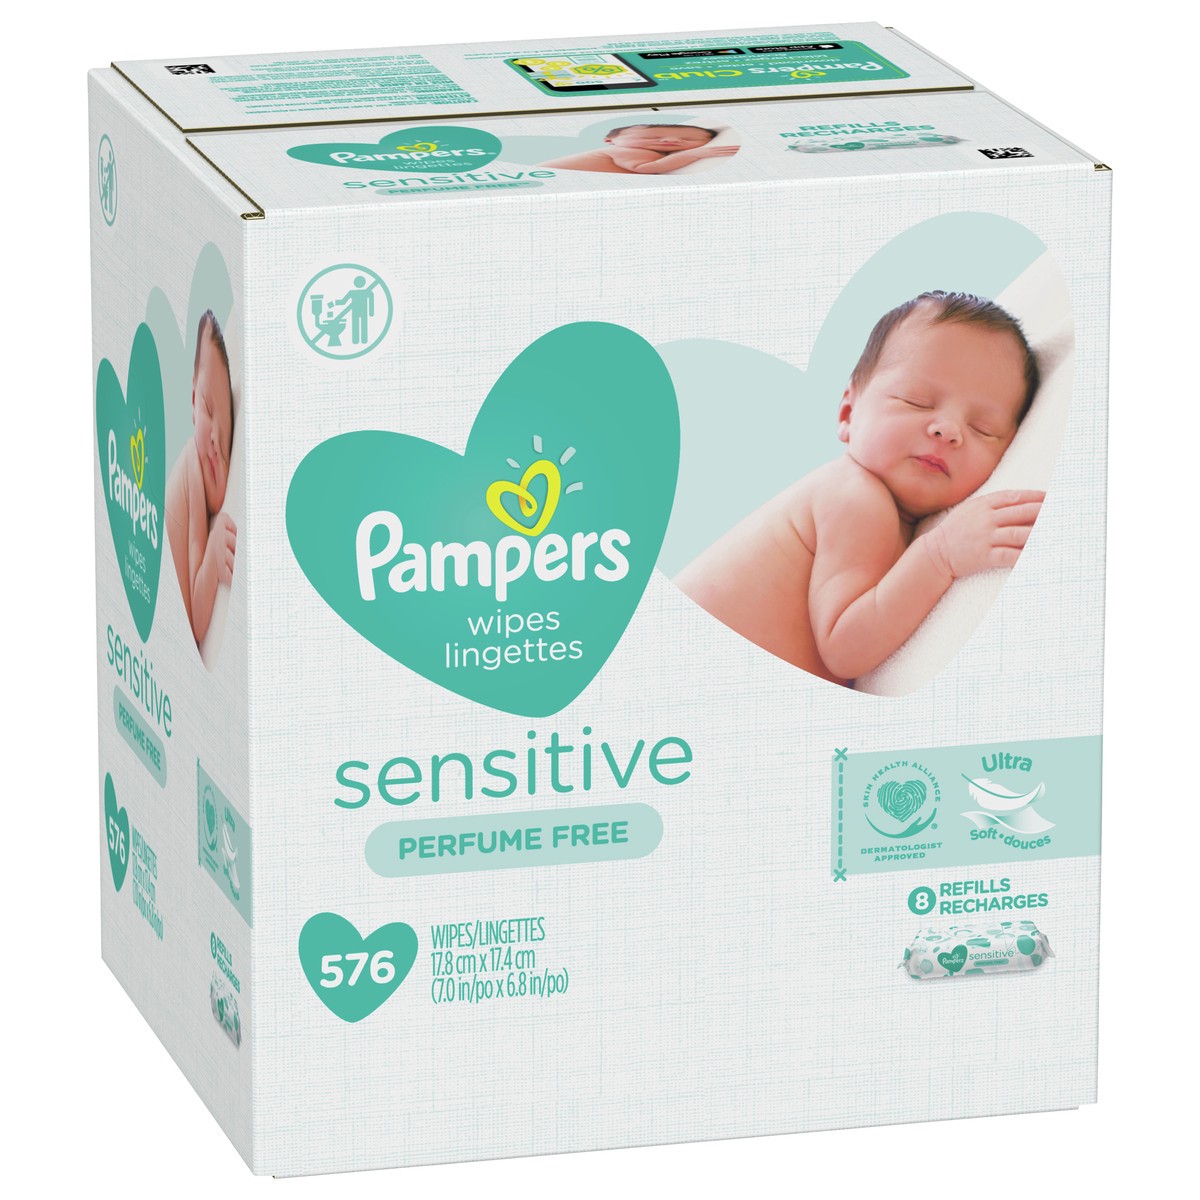 slide 2 of 4, Pampers Baby Wipes Sensitive Perfume Free 8X Refill Packs (Tub Not Included) 576 Count, 576 ct